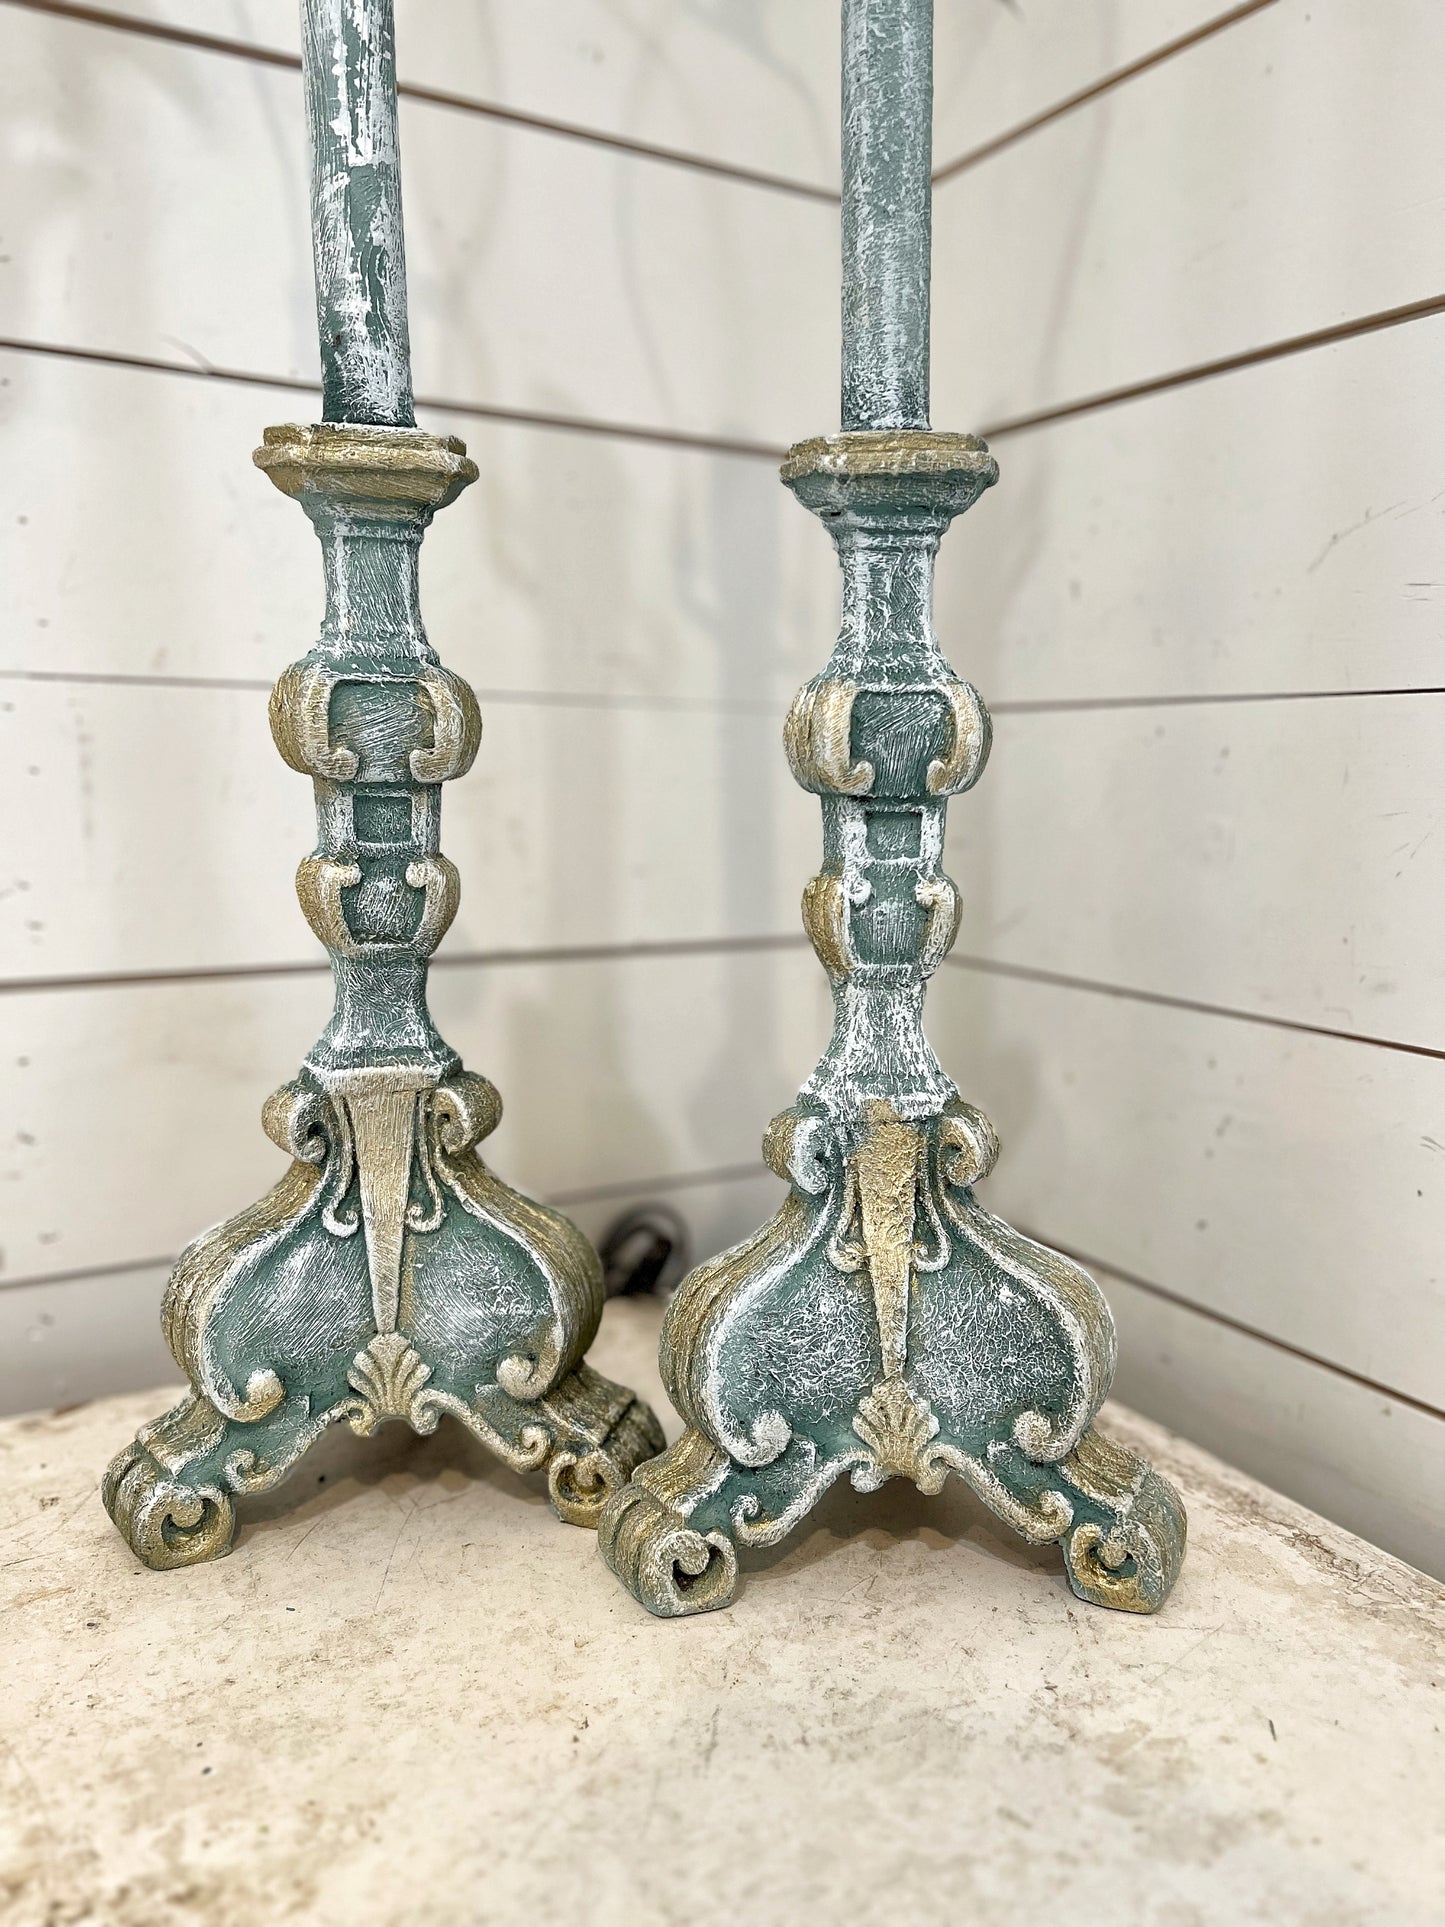 Ornate Candlestick Lamp Set - Hand Painted